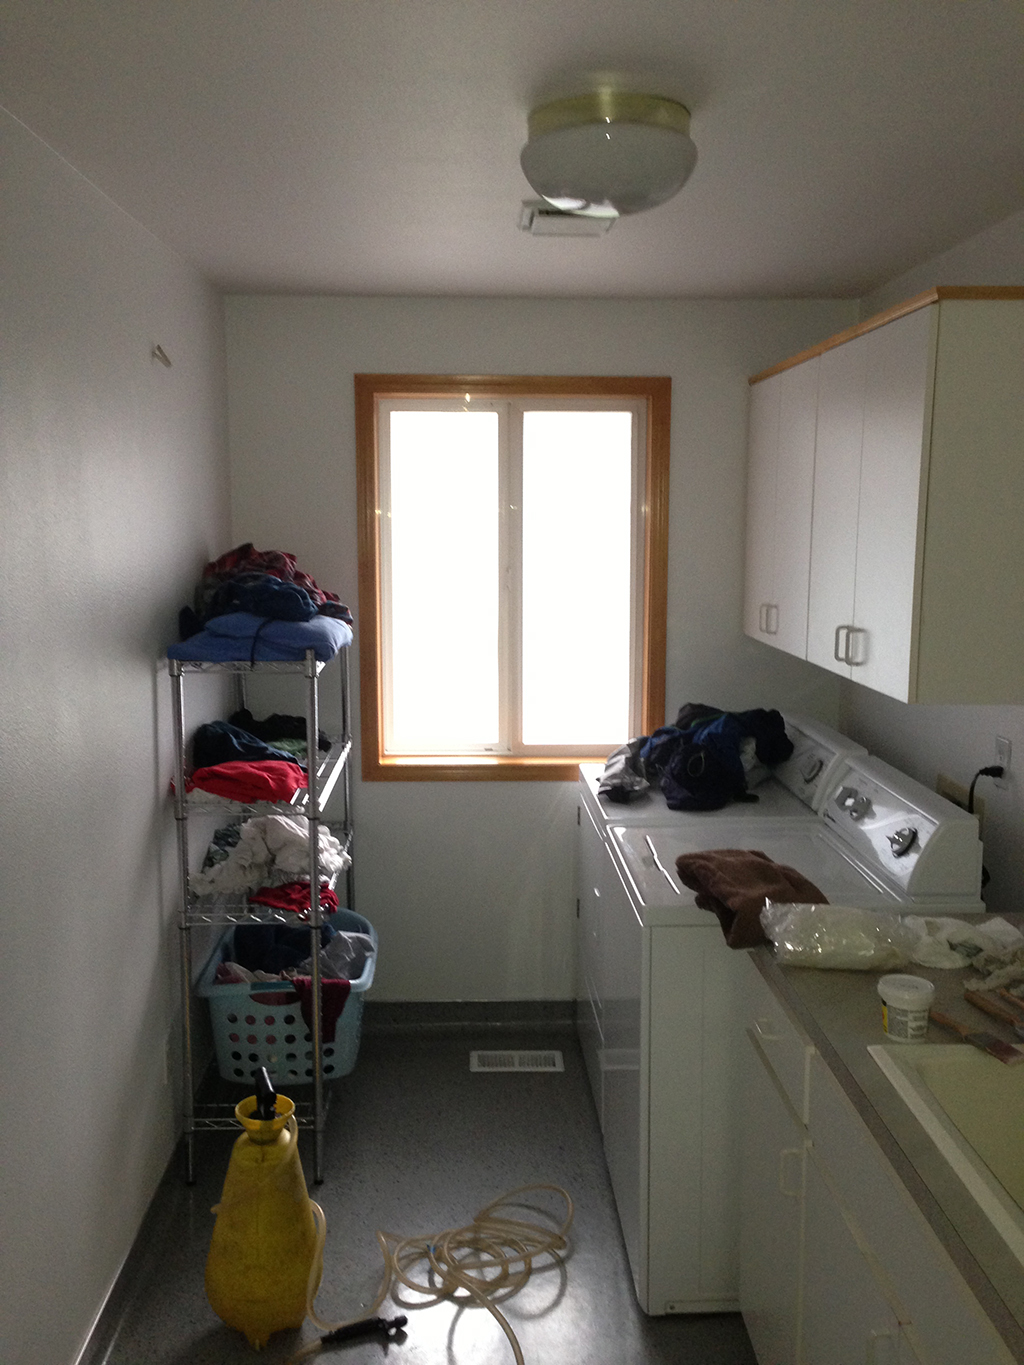 Window tinting in laundry room